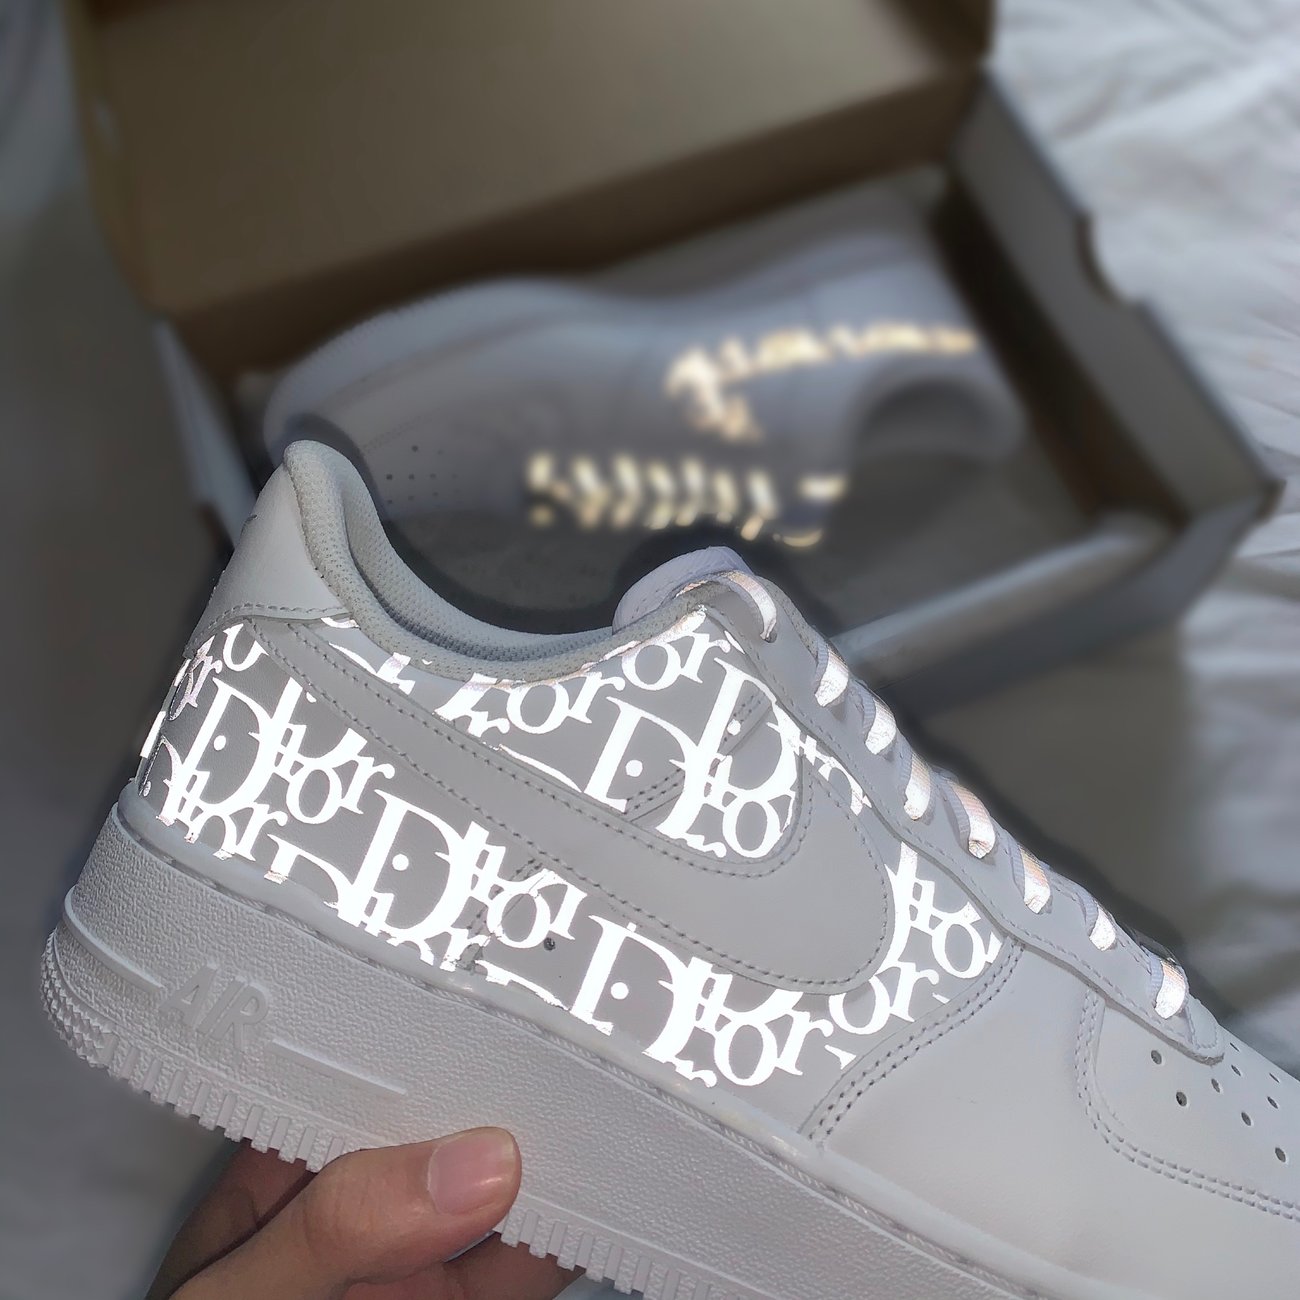 Reflective Dior X Nike Airforce1s | customs by saami